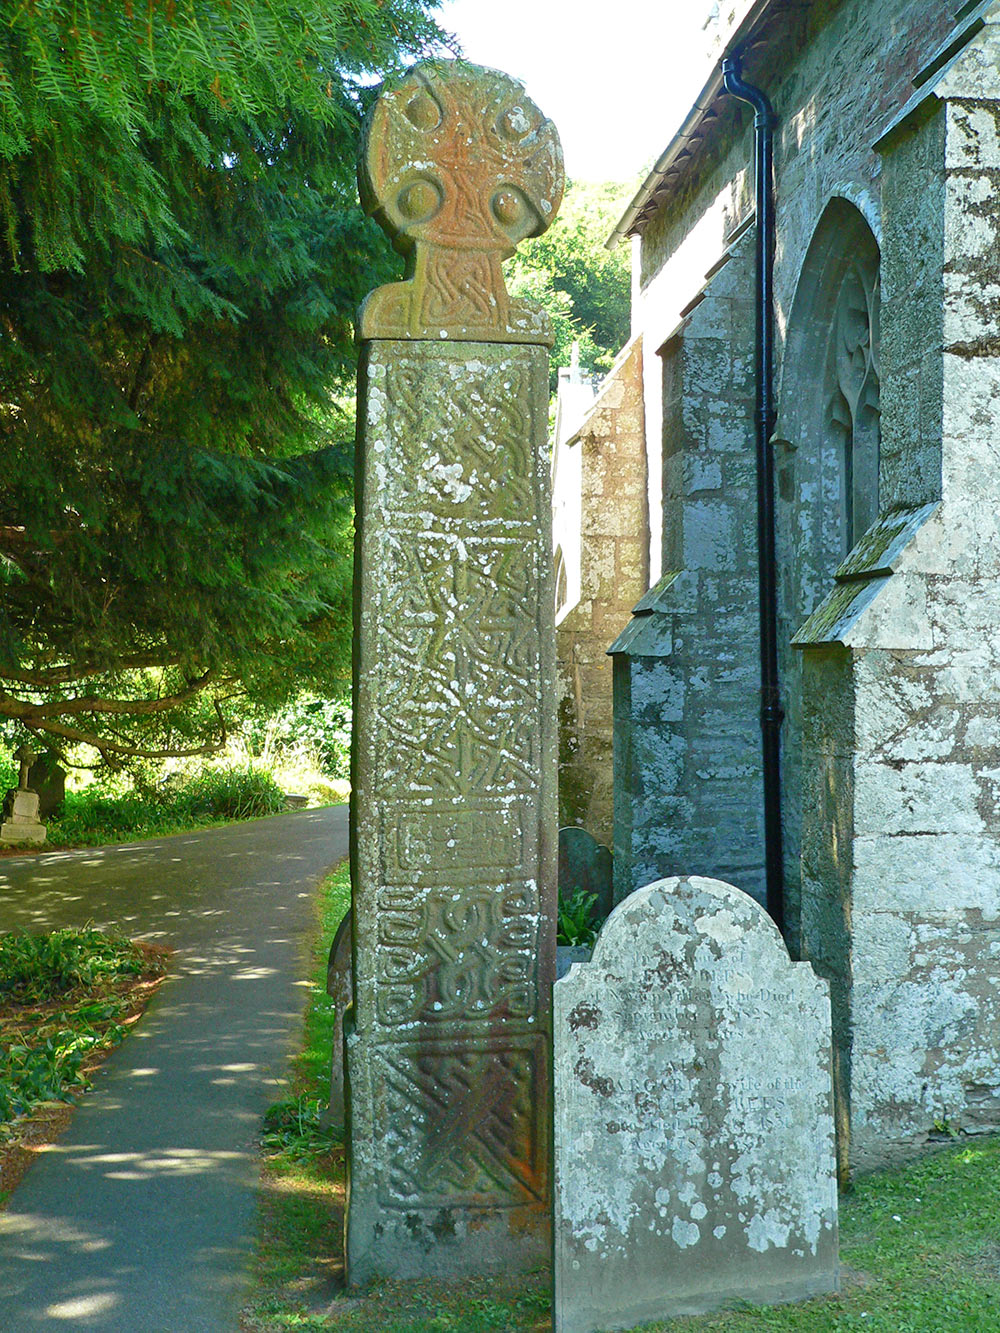 The Celtic Cross at Nevern